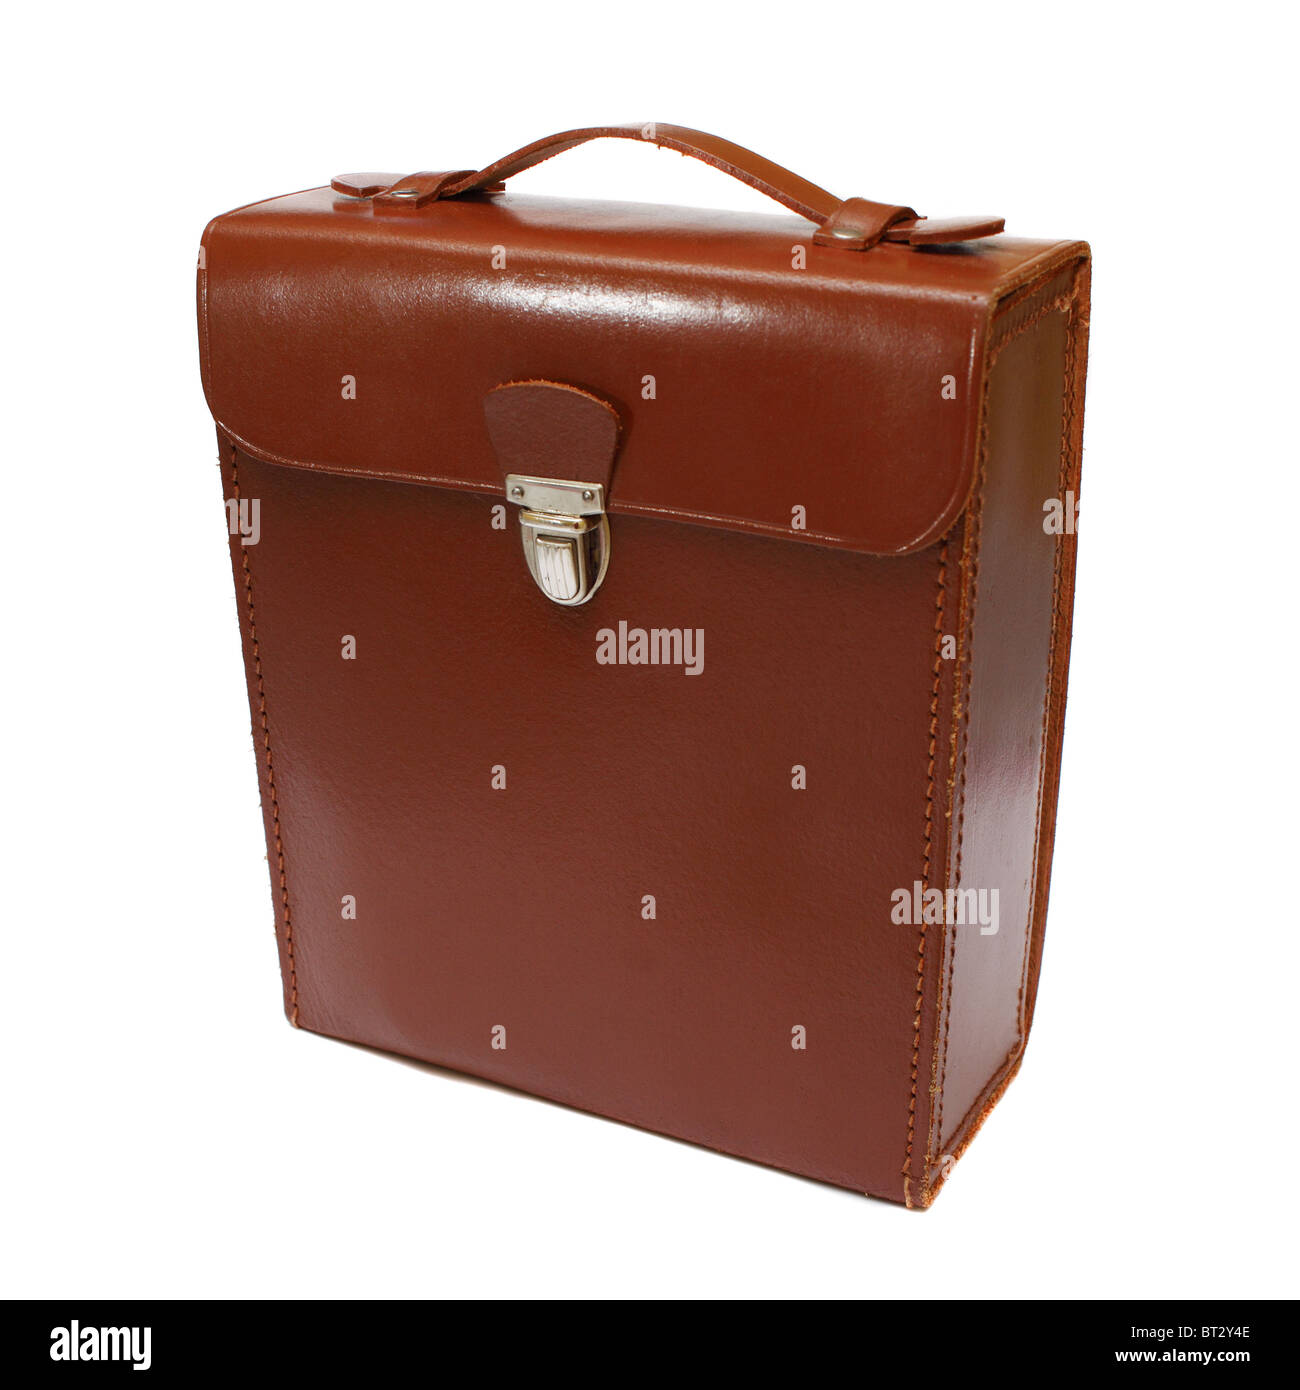 Bag square leathern brown Stock Photo